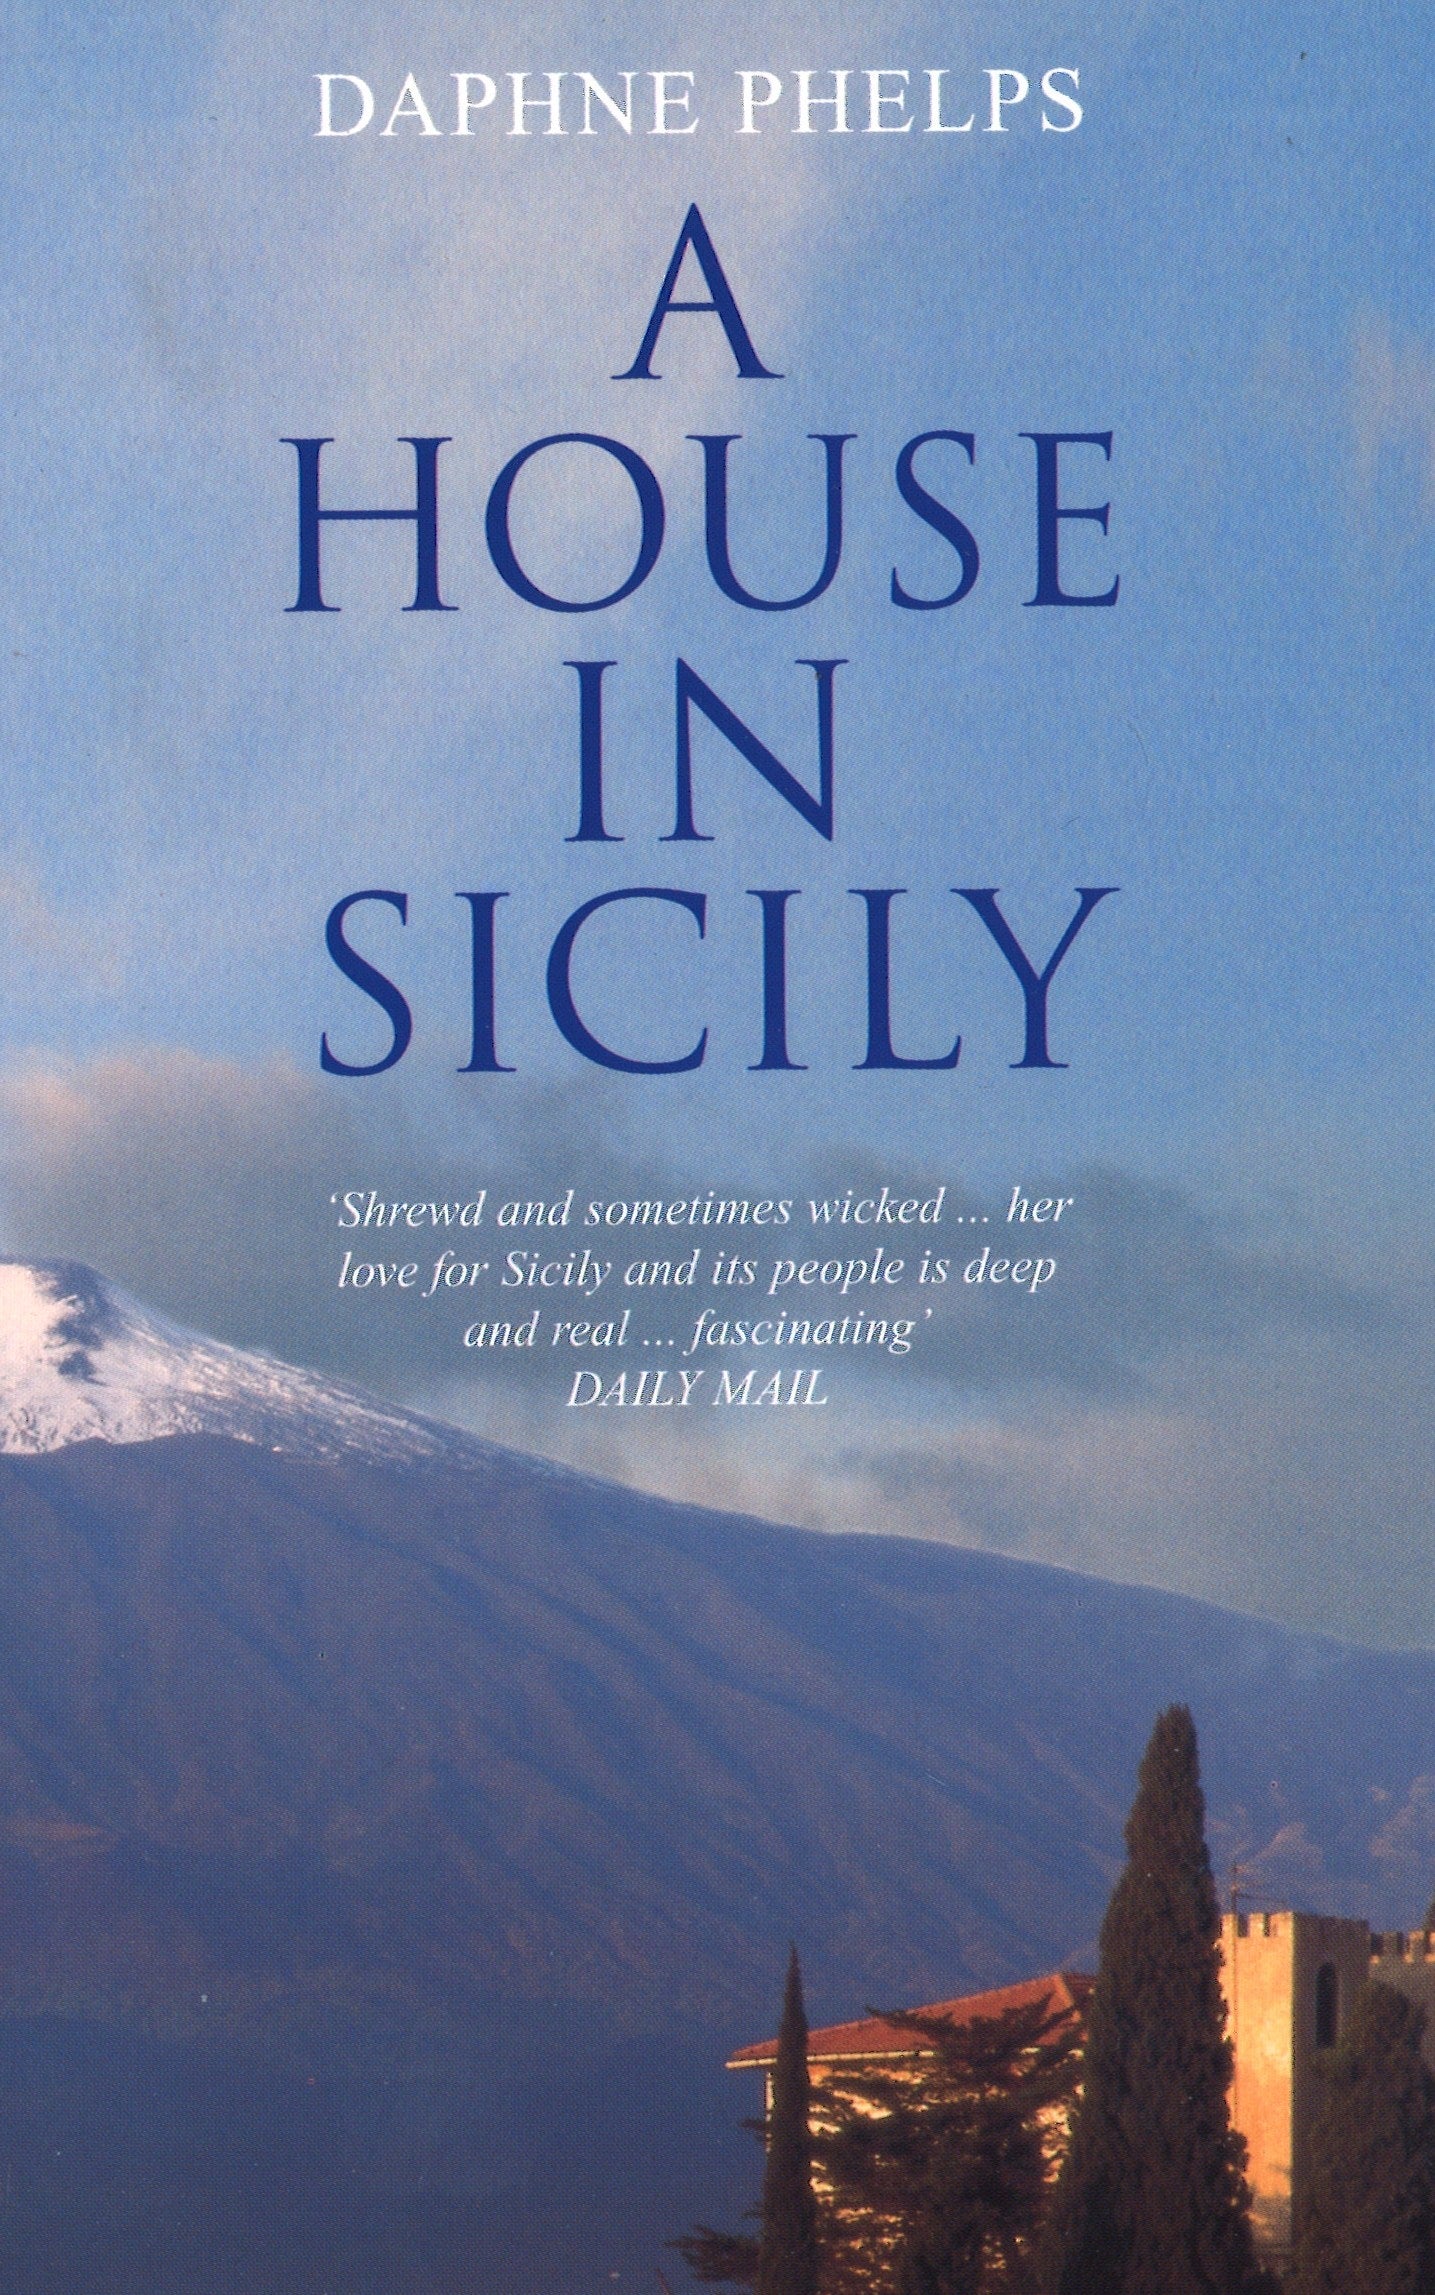 A House in Sicily by Daphne Phelps